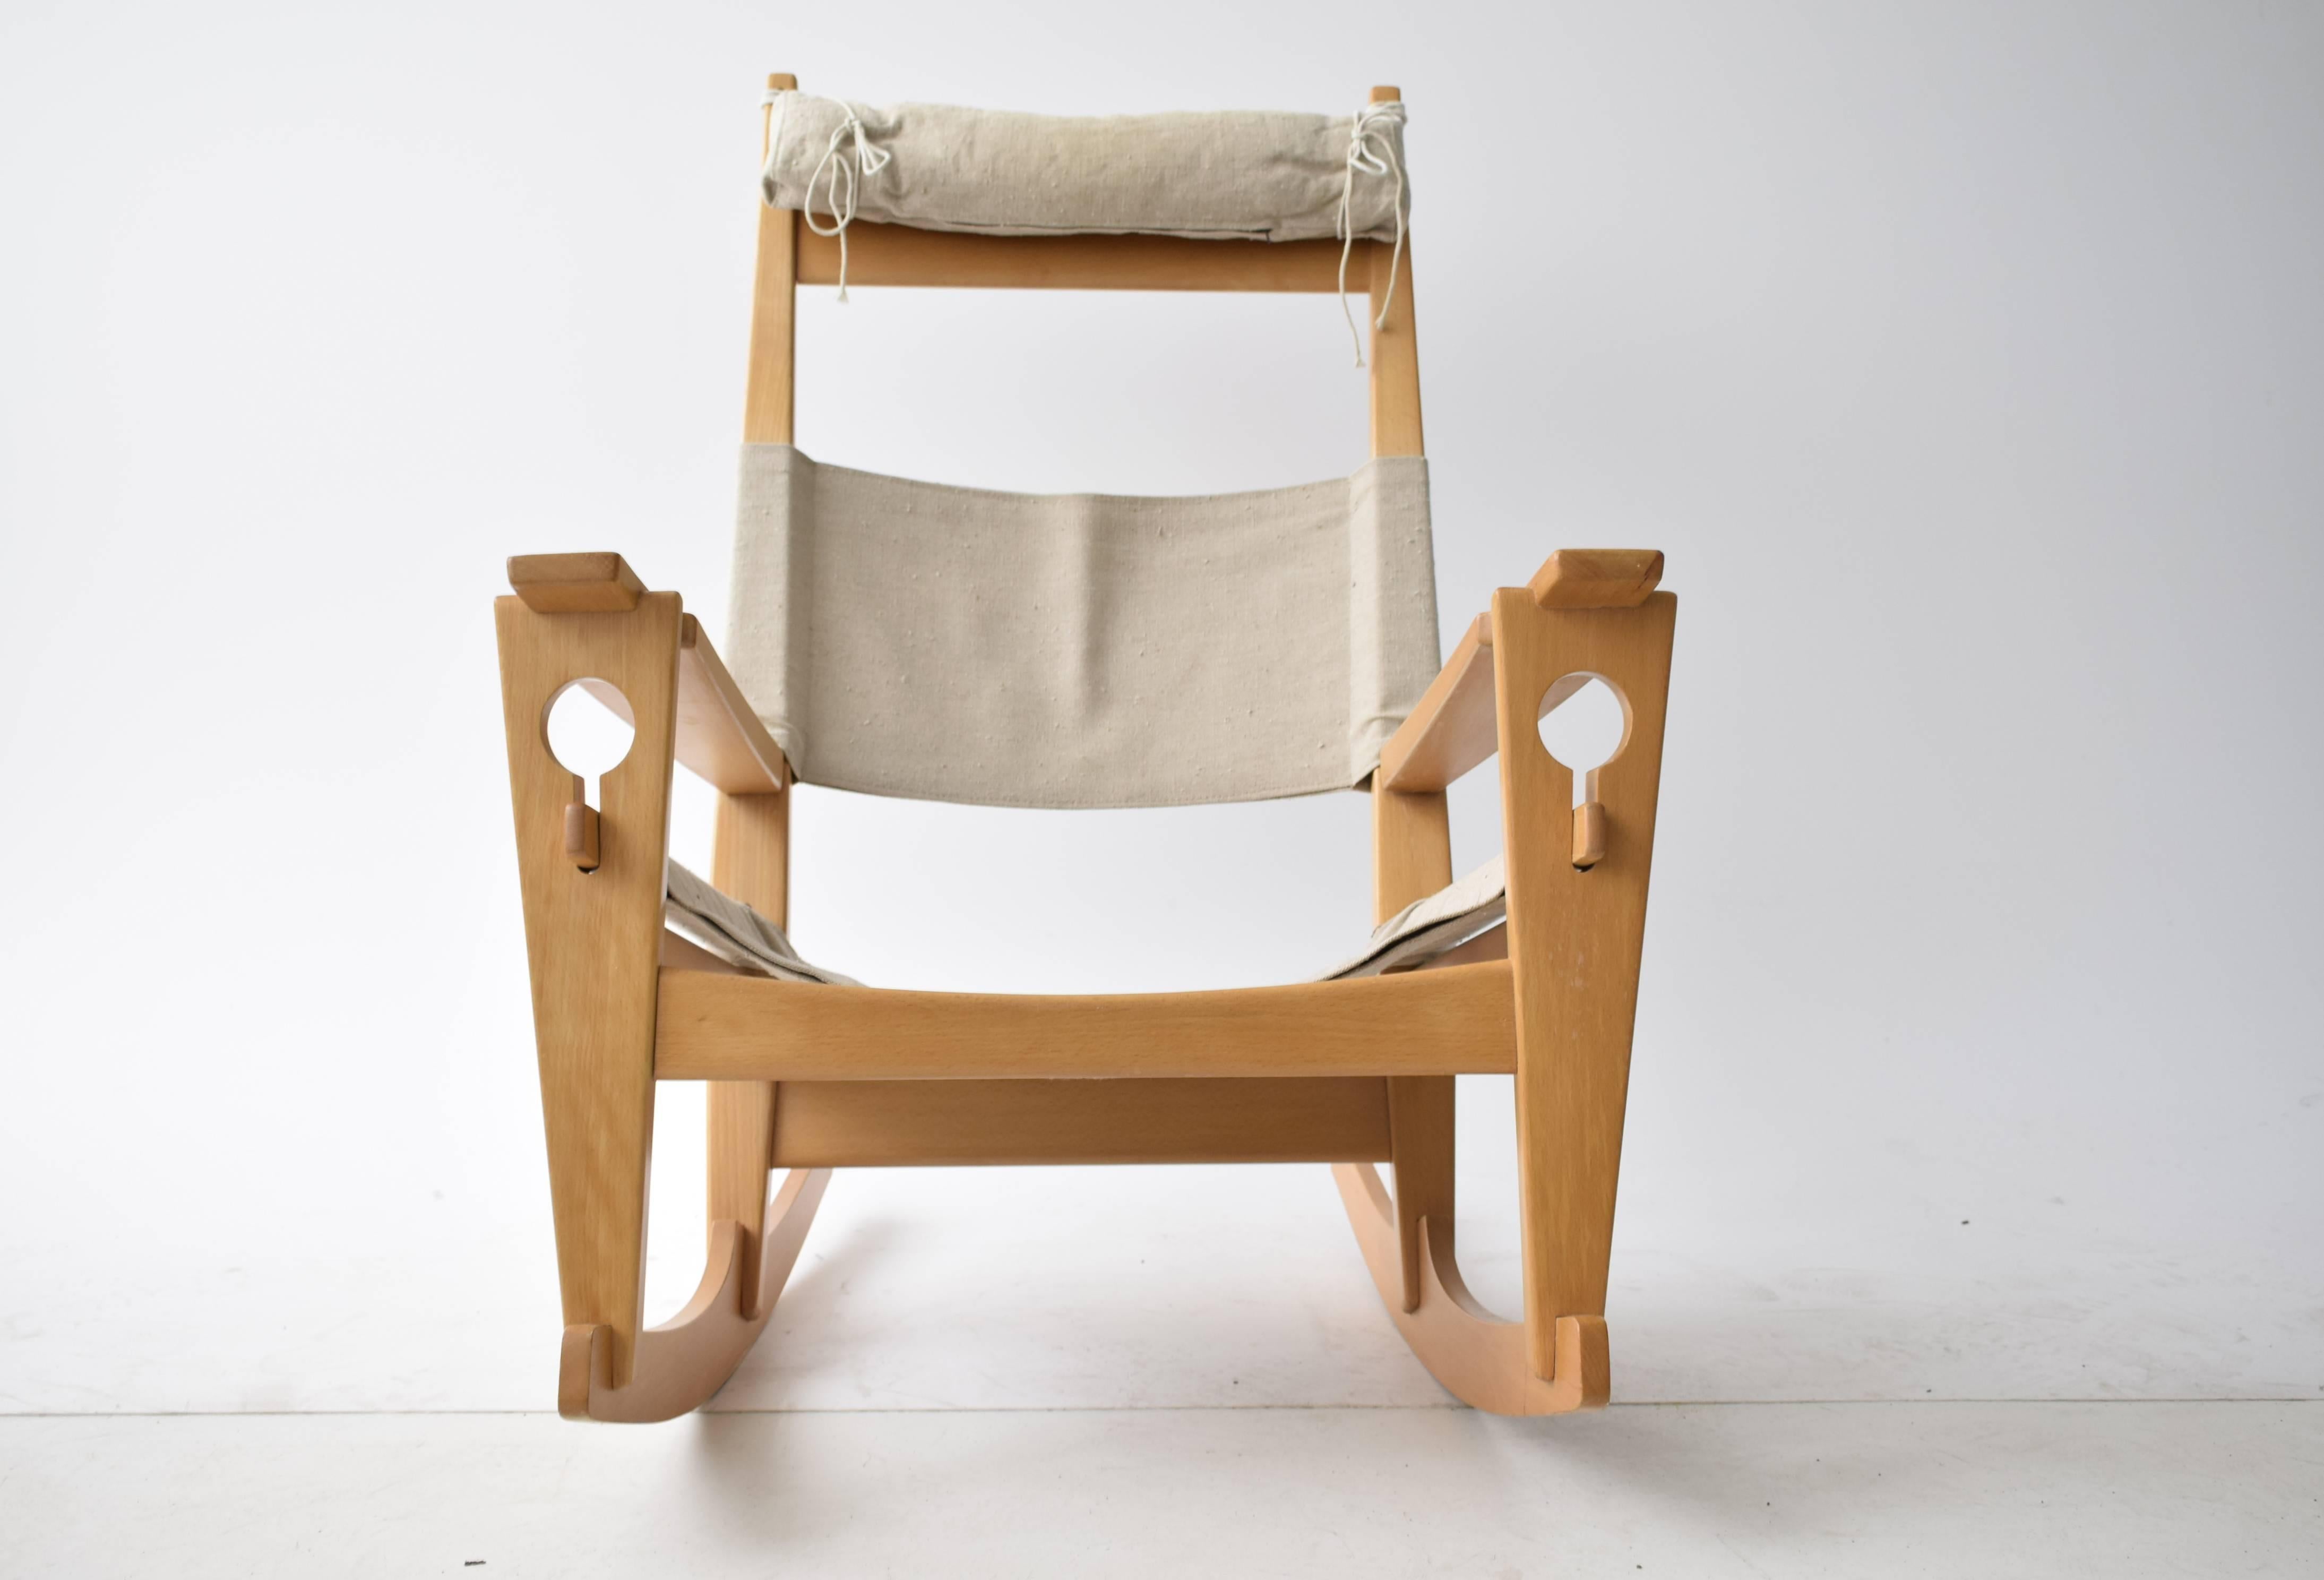 Keyhole rocking chair designed by Hans J. Wegner for GETAMA in Denmark in 1960s. Frame made in natural beechwood and linen.